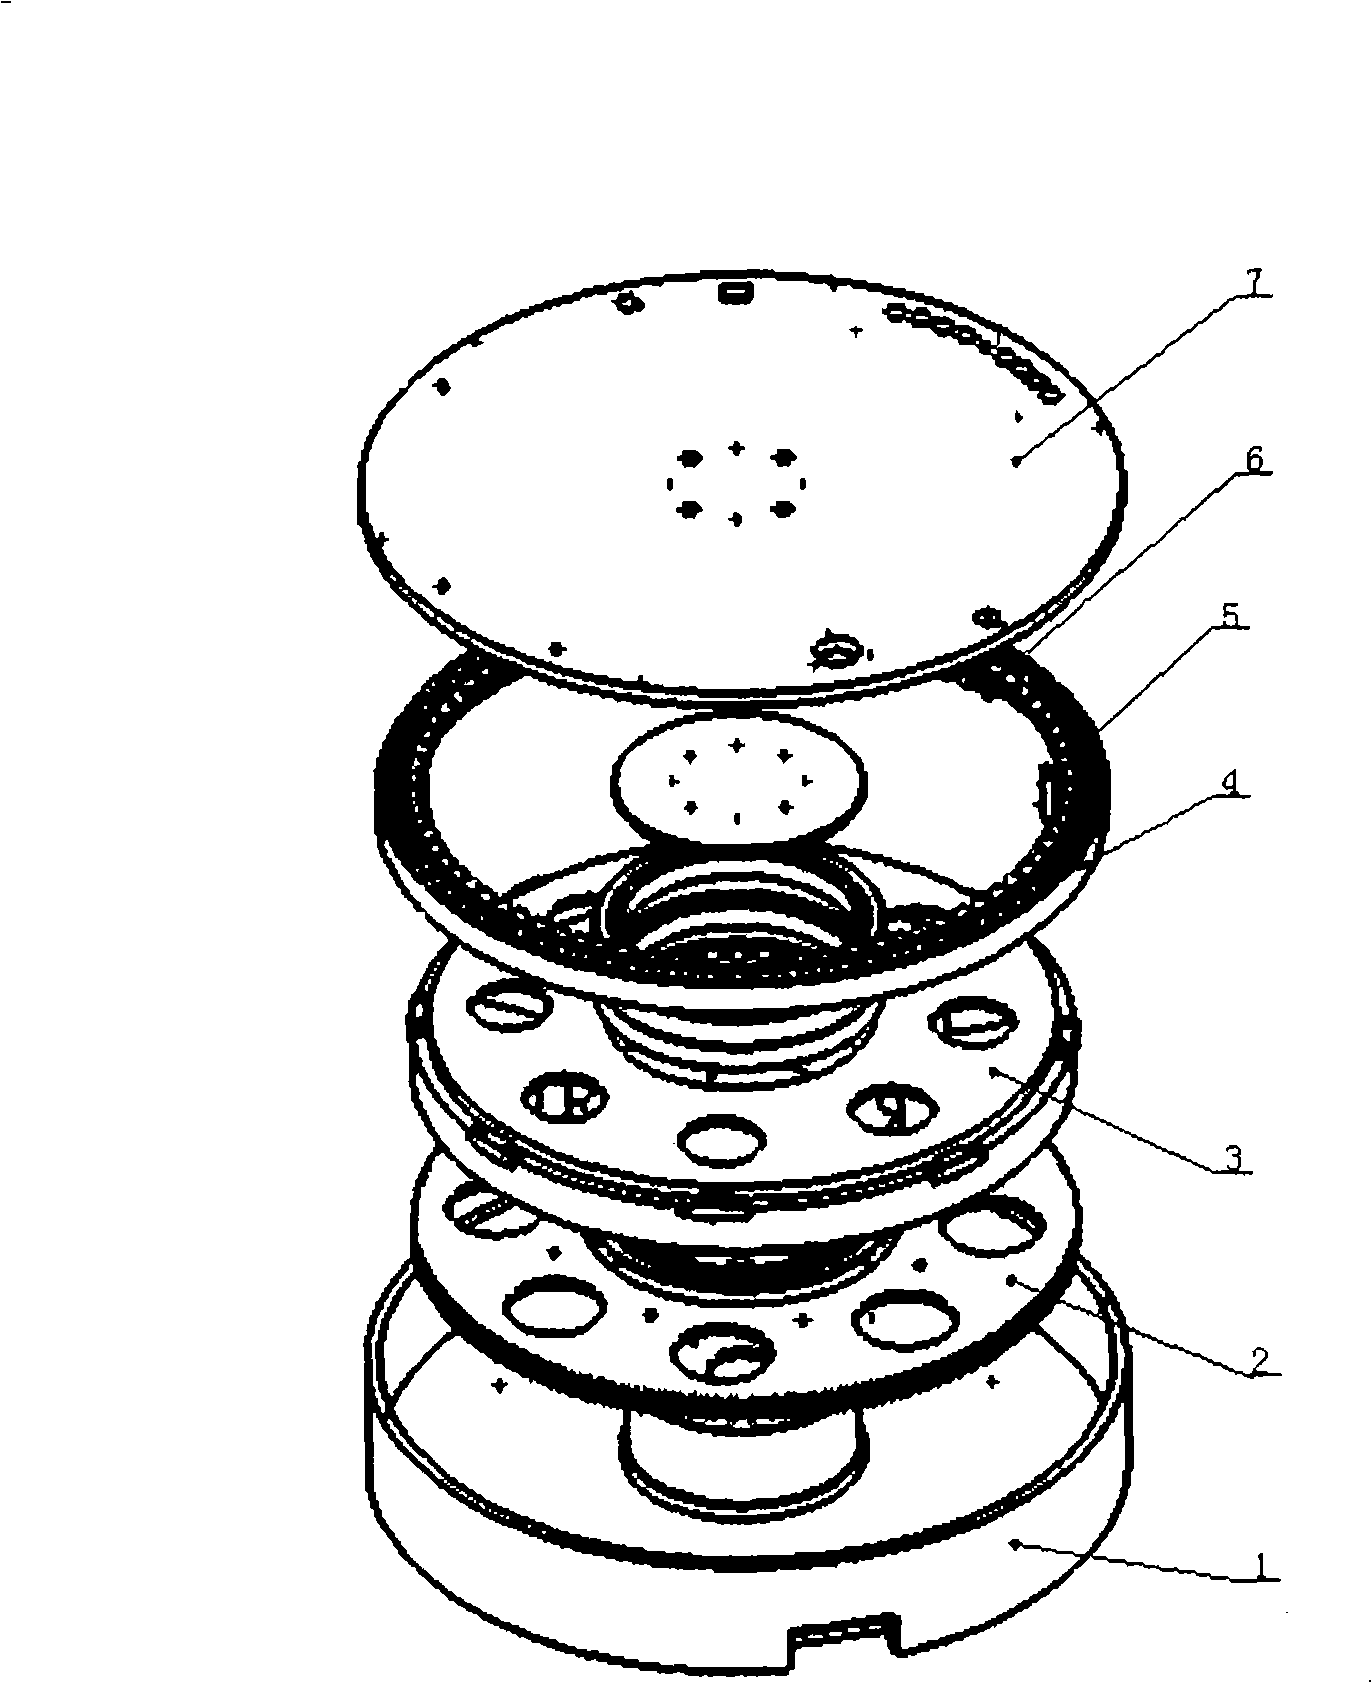 Reaction disc assembly